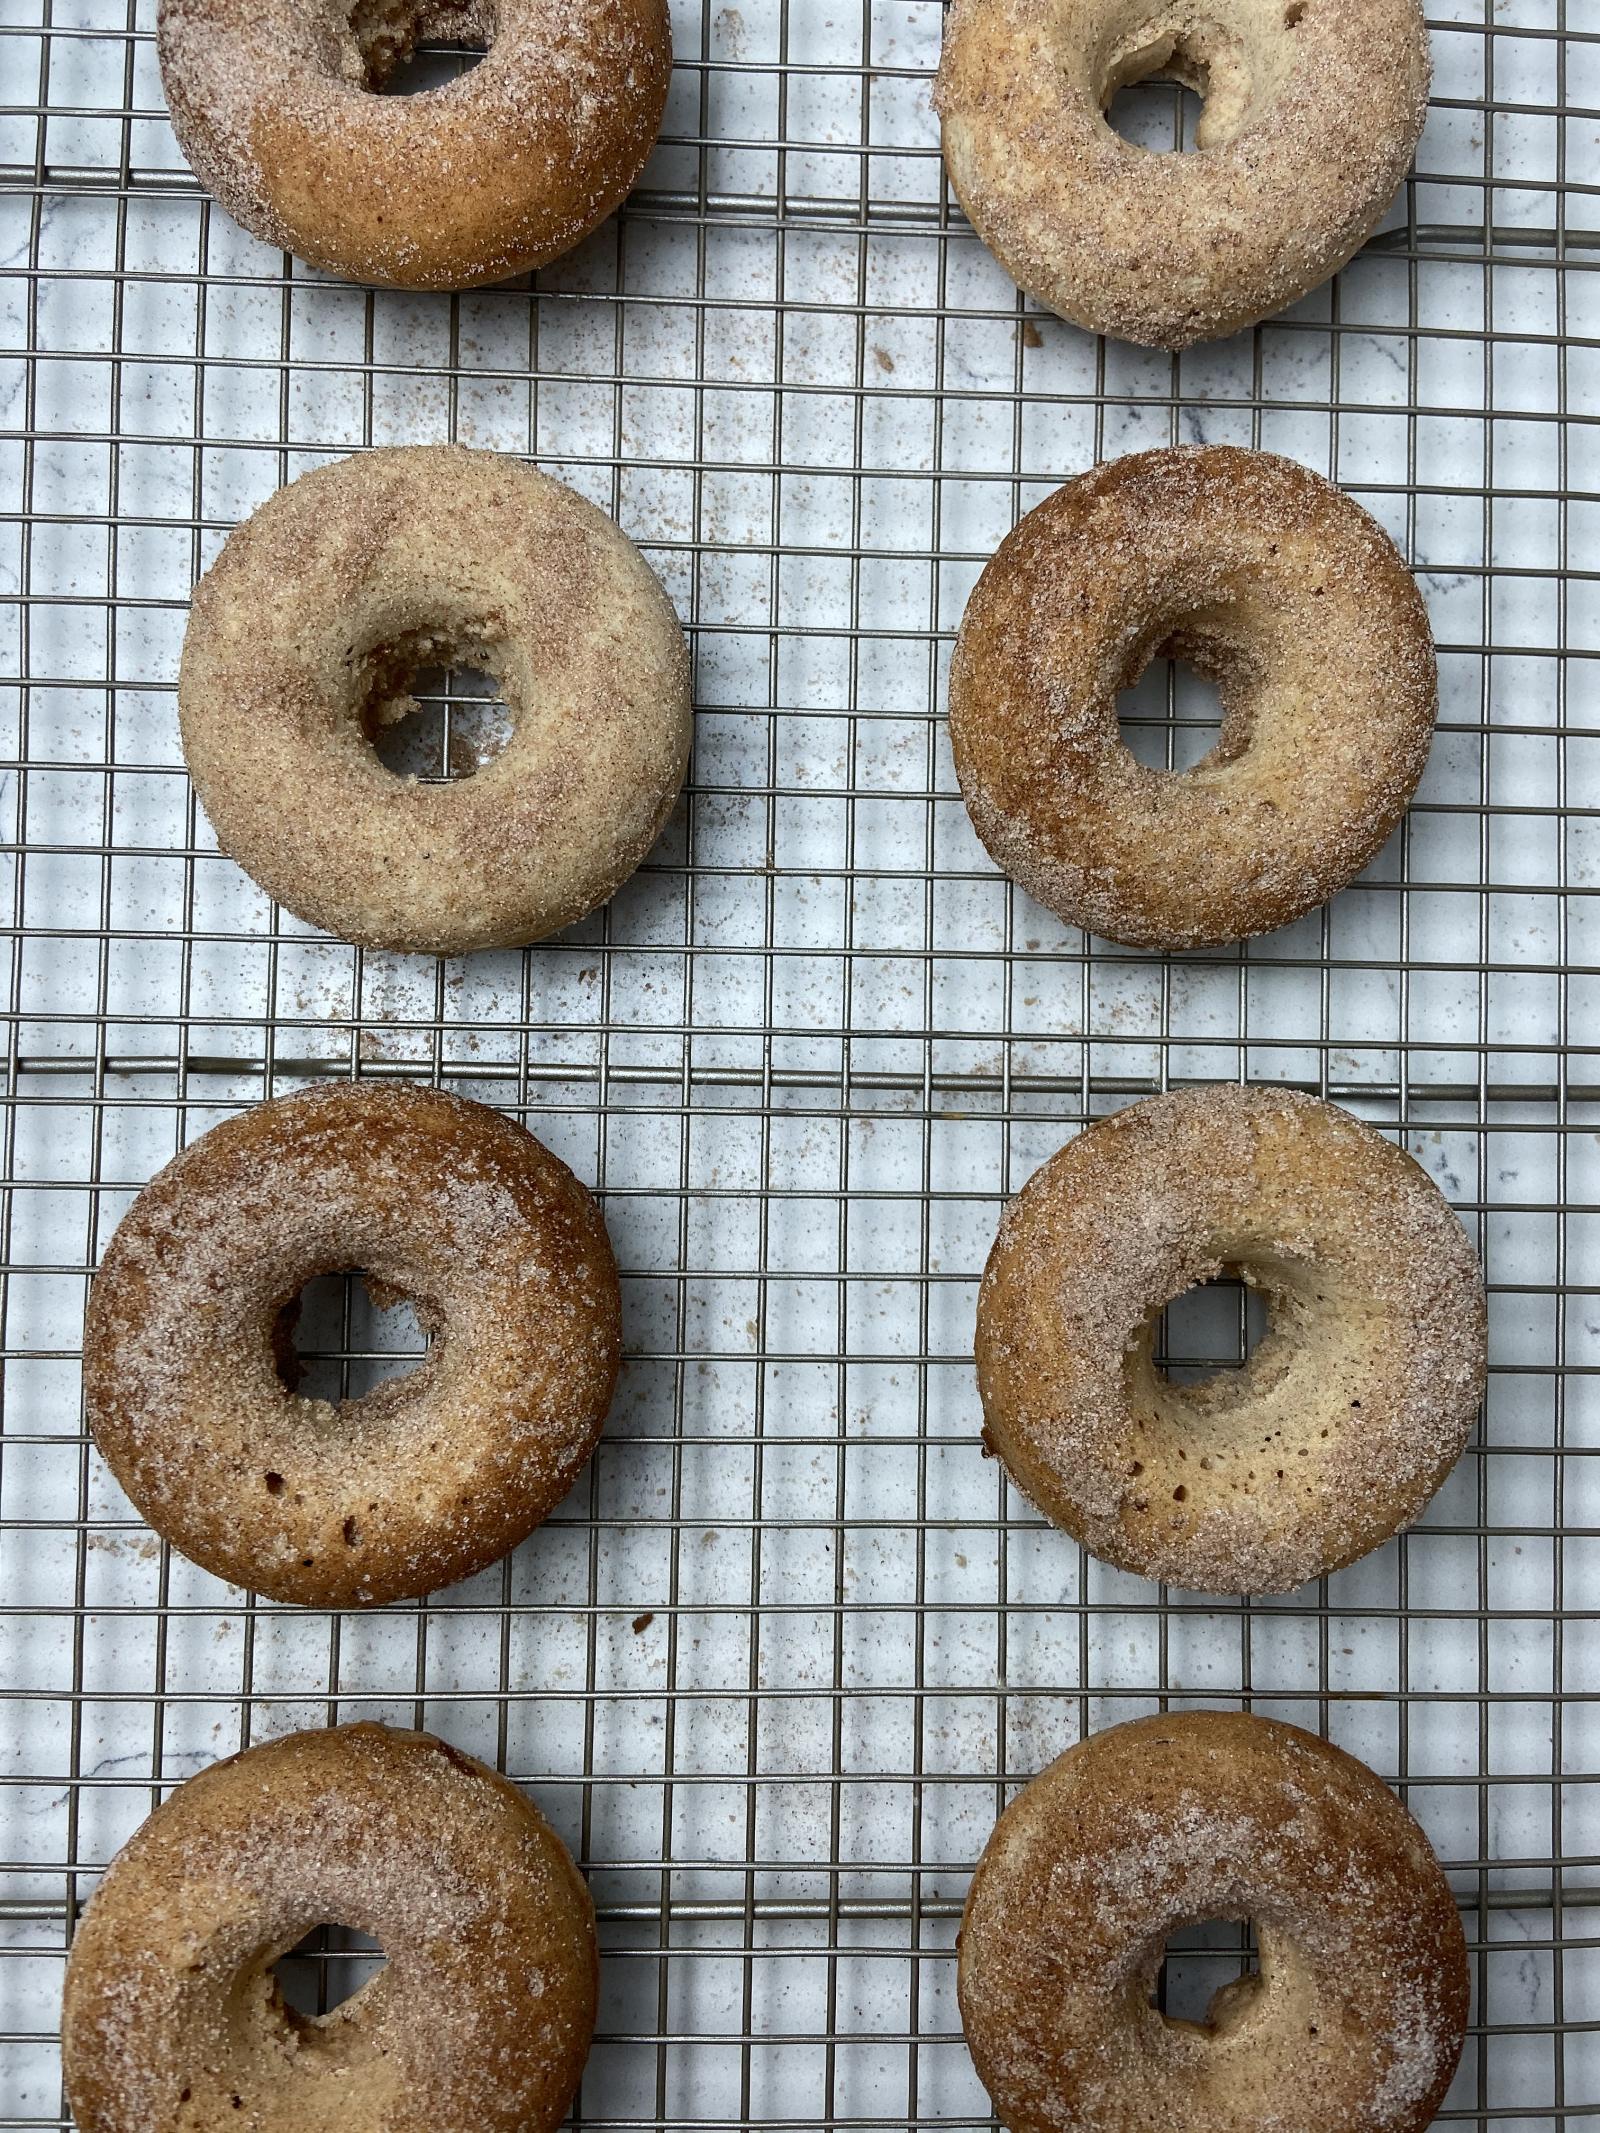 Baked Old Fashioned Donuts - The Dessert Dietitian